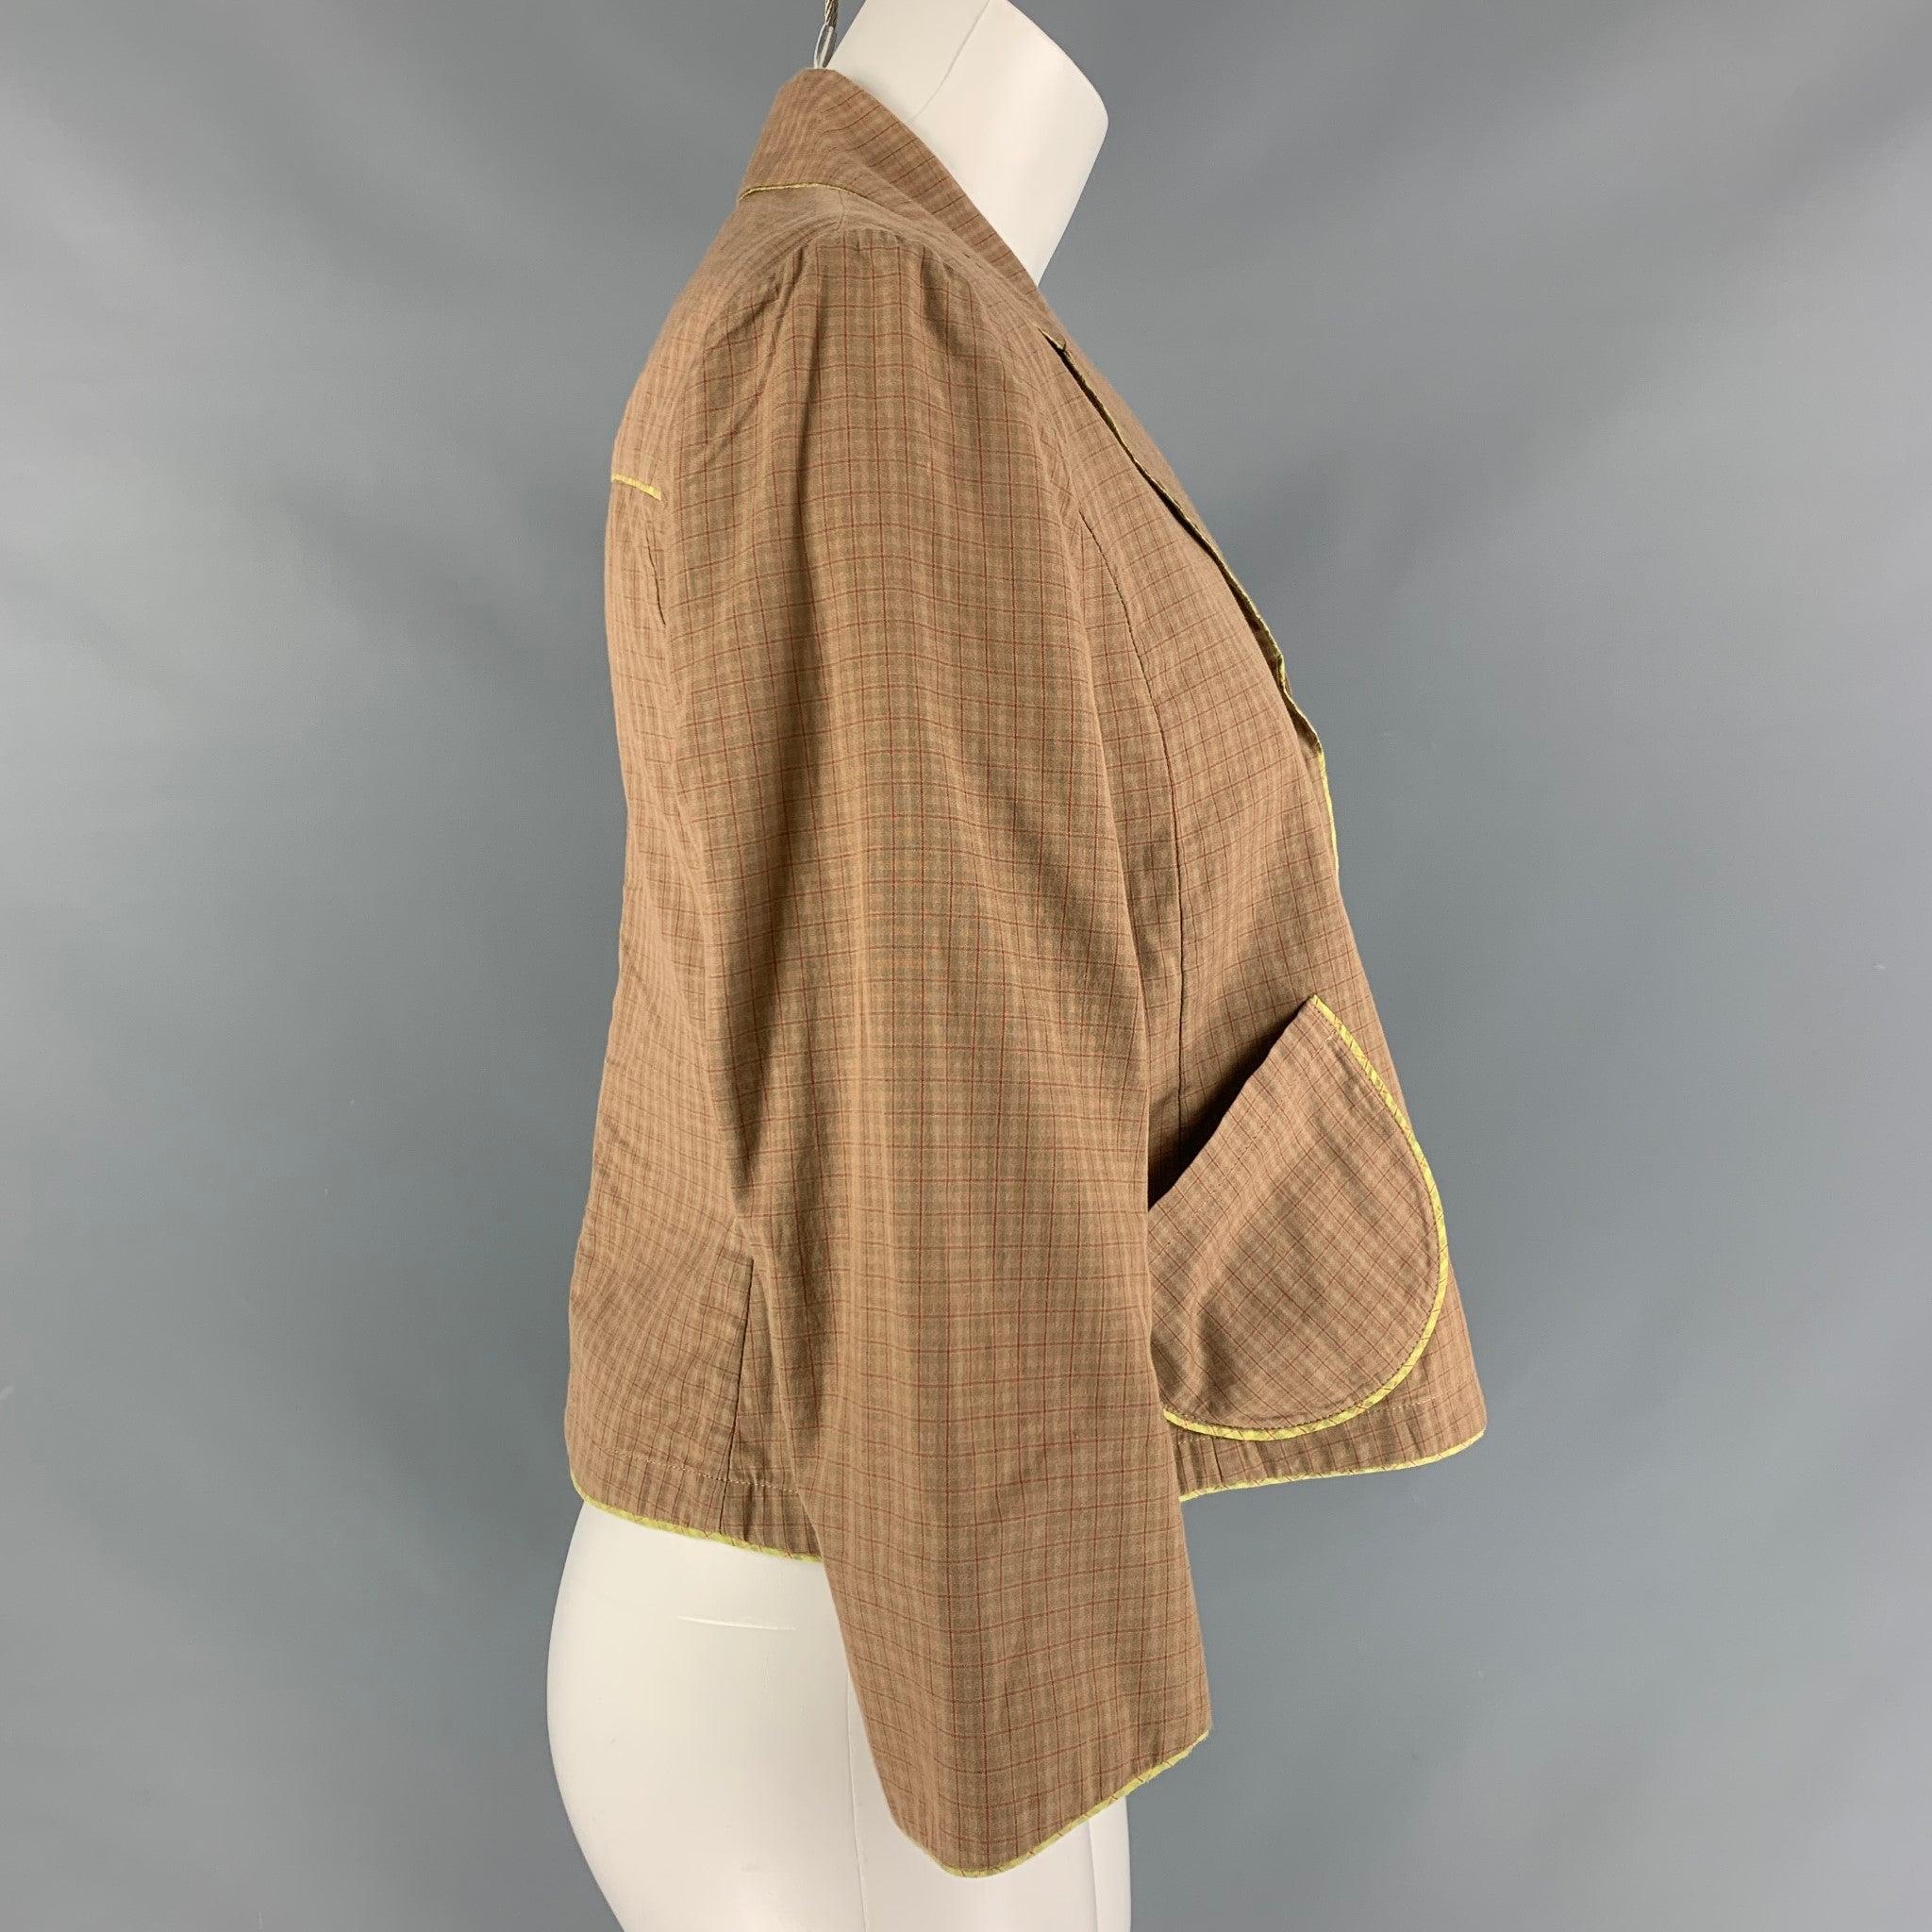 MARNI cropped jacket comes in tan and red plaid cotton fabric featuring a 3/4 sleeves, frontal pockets, and two button closure. Made in Italy.Excellent Pre-Owned Condition.  

Marked:   40 

Measurements: 
 
Shoulder: 14 inches Bust: 39 inches